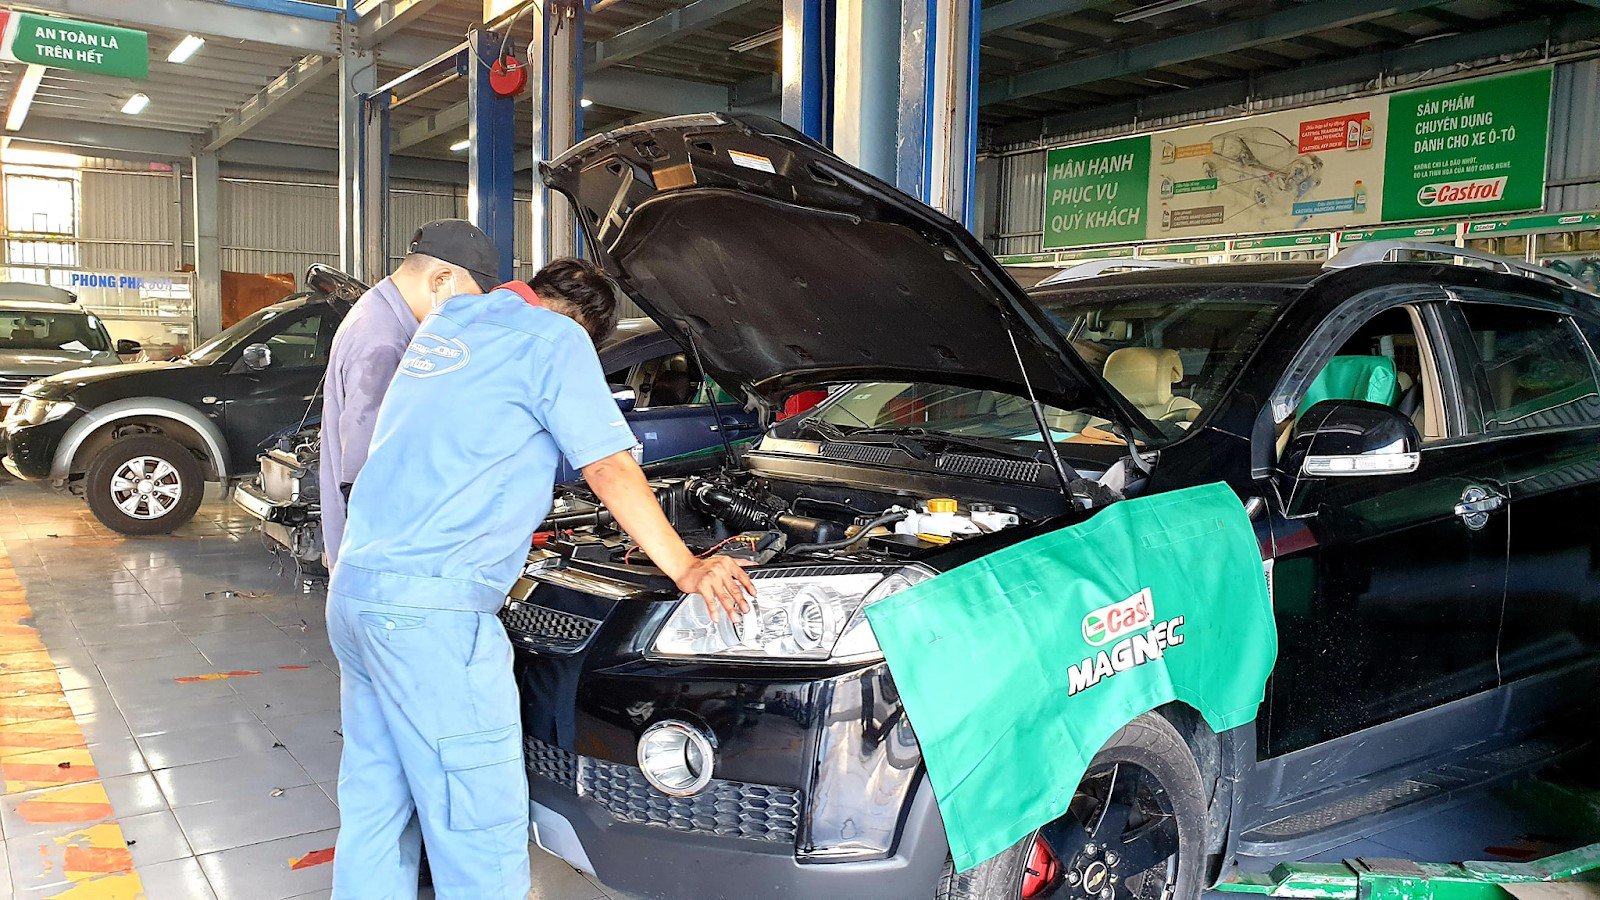 Practice at the Garage under the direct guidance of skilled teachers and technicians